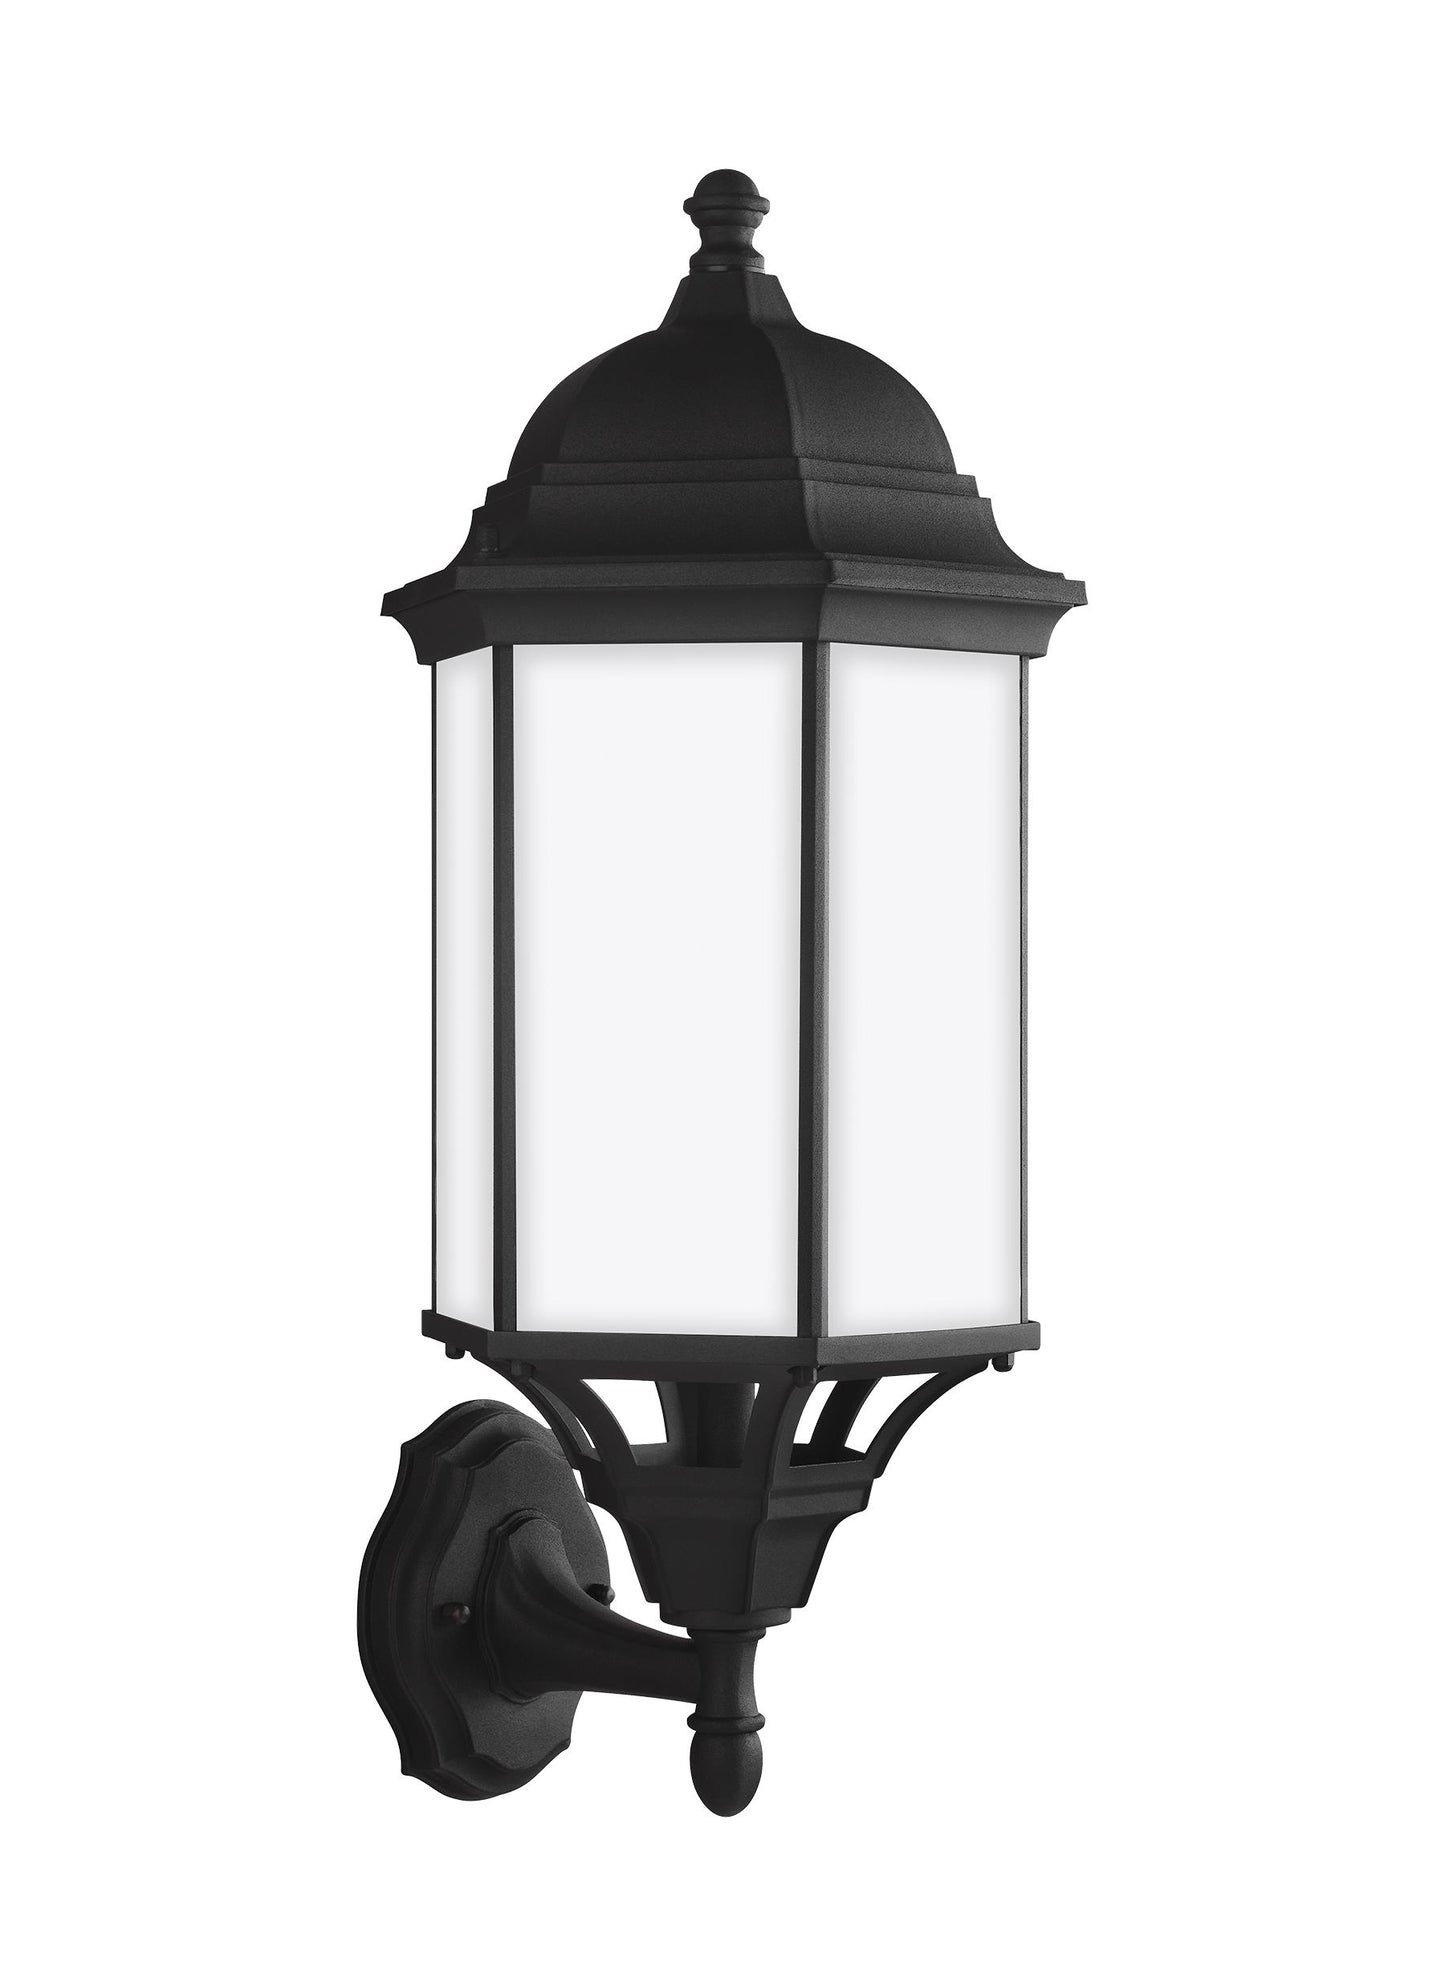 Sevier traditional 1-light outdoor exterior large uplight outdoor wall lantern sconce in black finish with satin etched gl...